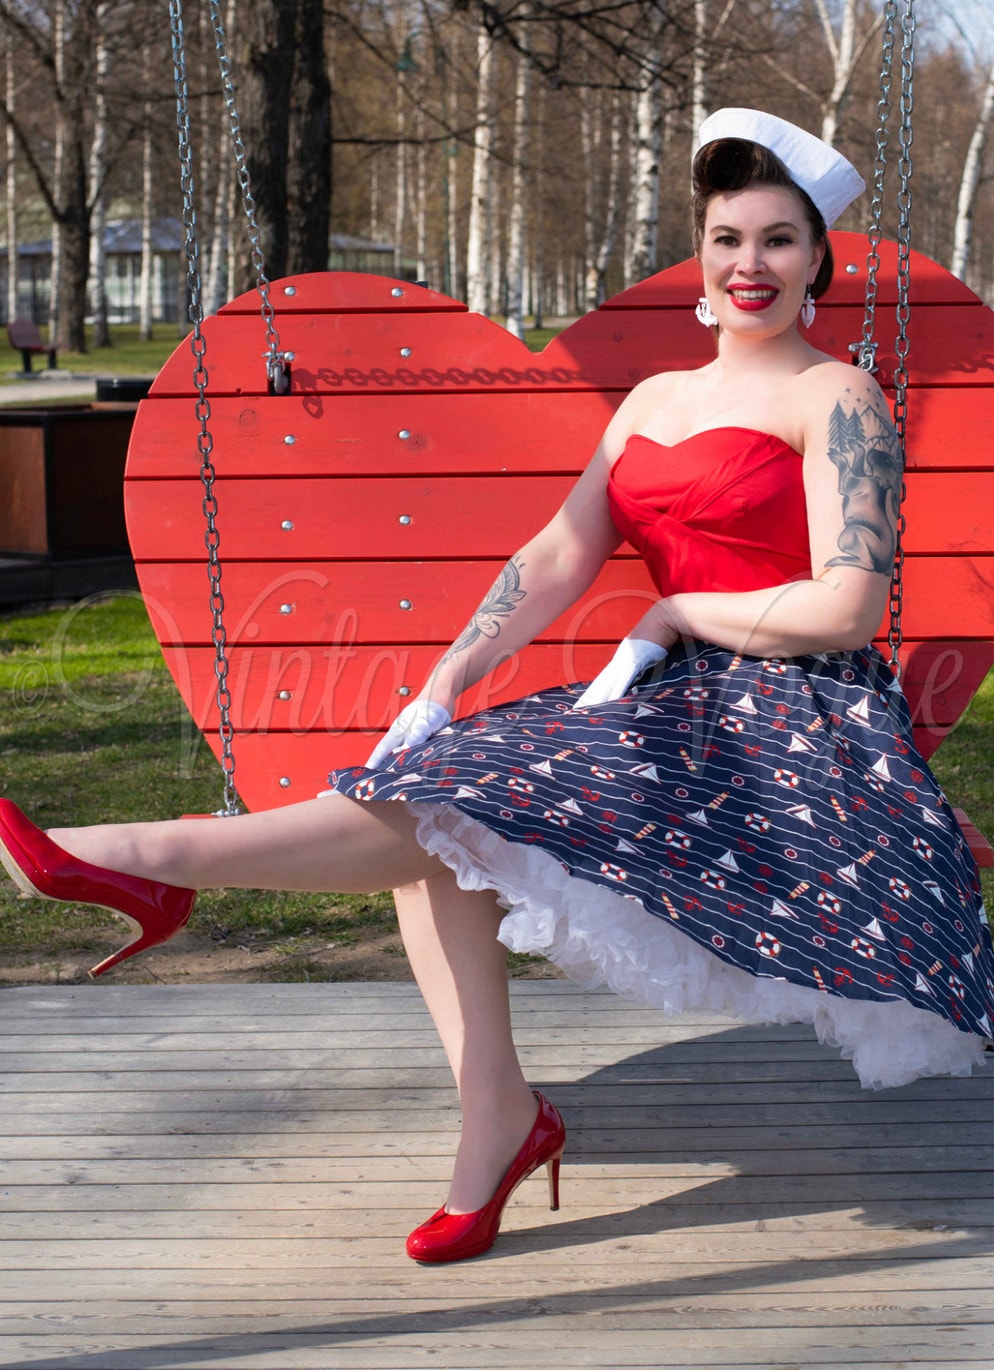 Dolly and Dotty 50's Retro Pin-Up Maritim Swing Kleid Melissa Nautical in Navy & Rot Petticoat Damenkleid Jive Lindy Hop Mottoparty Sommerkleid